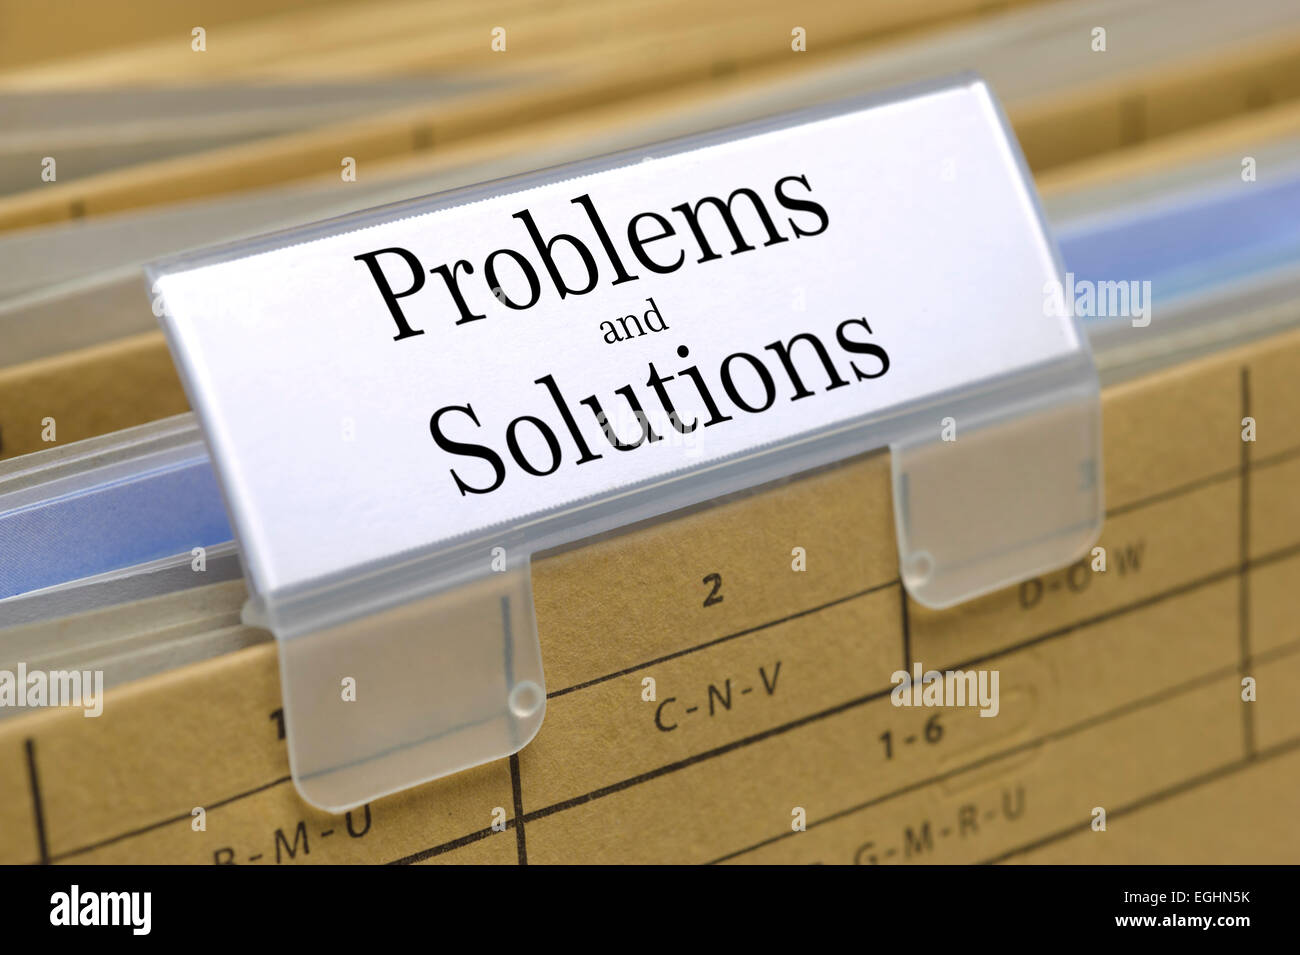 problems and solutions printed on file folder Stock Photo